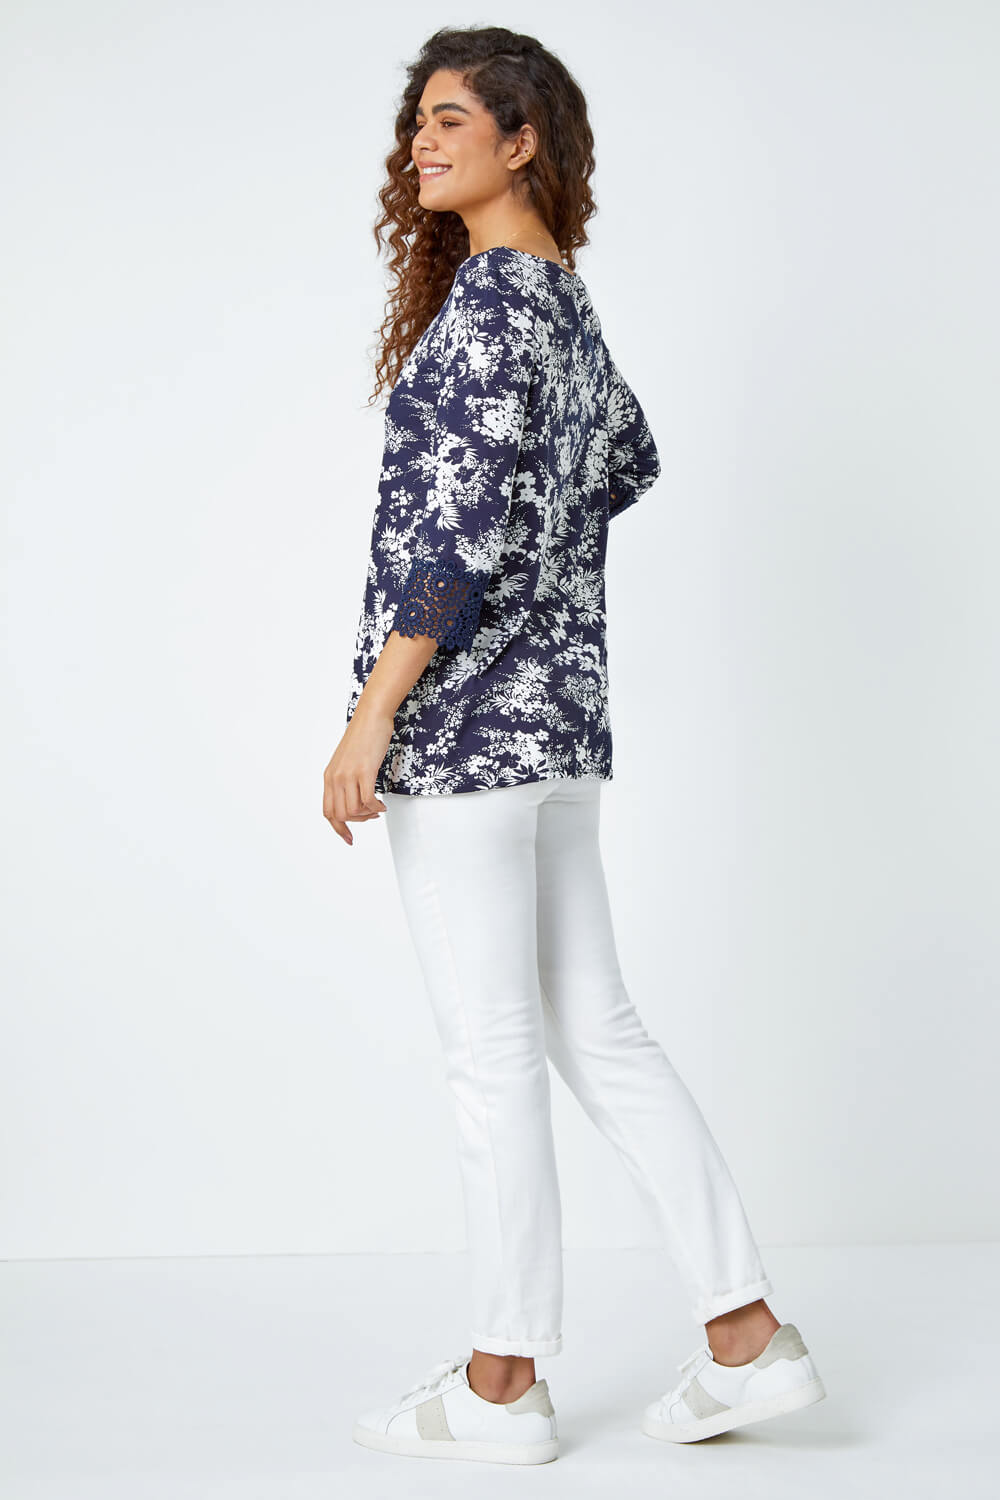 Navy  Floral Lace Trim Stretch Top, Image 3 of 5